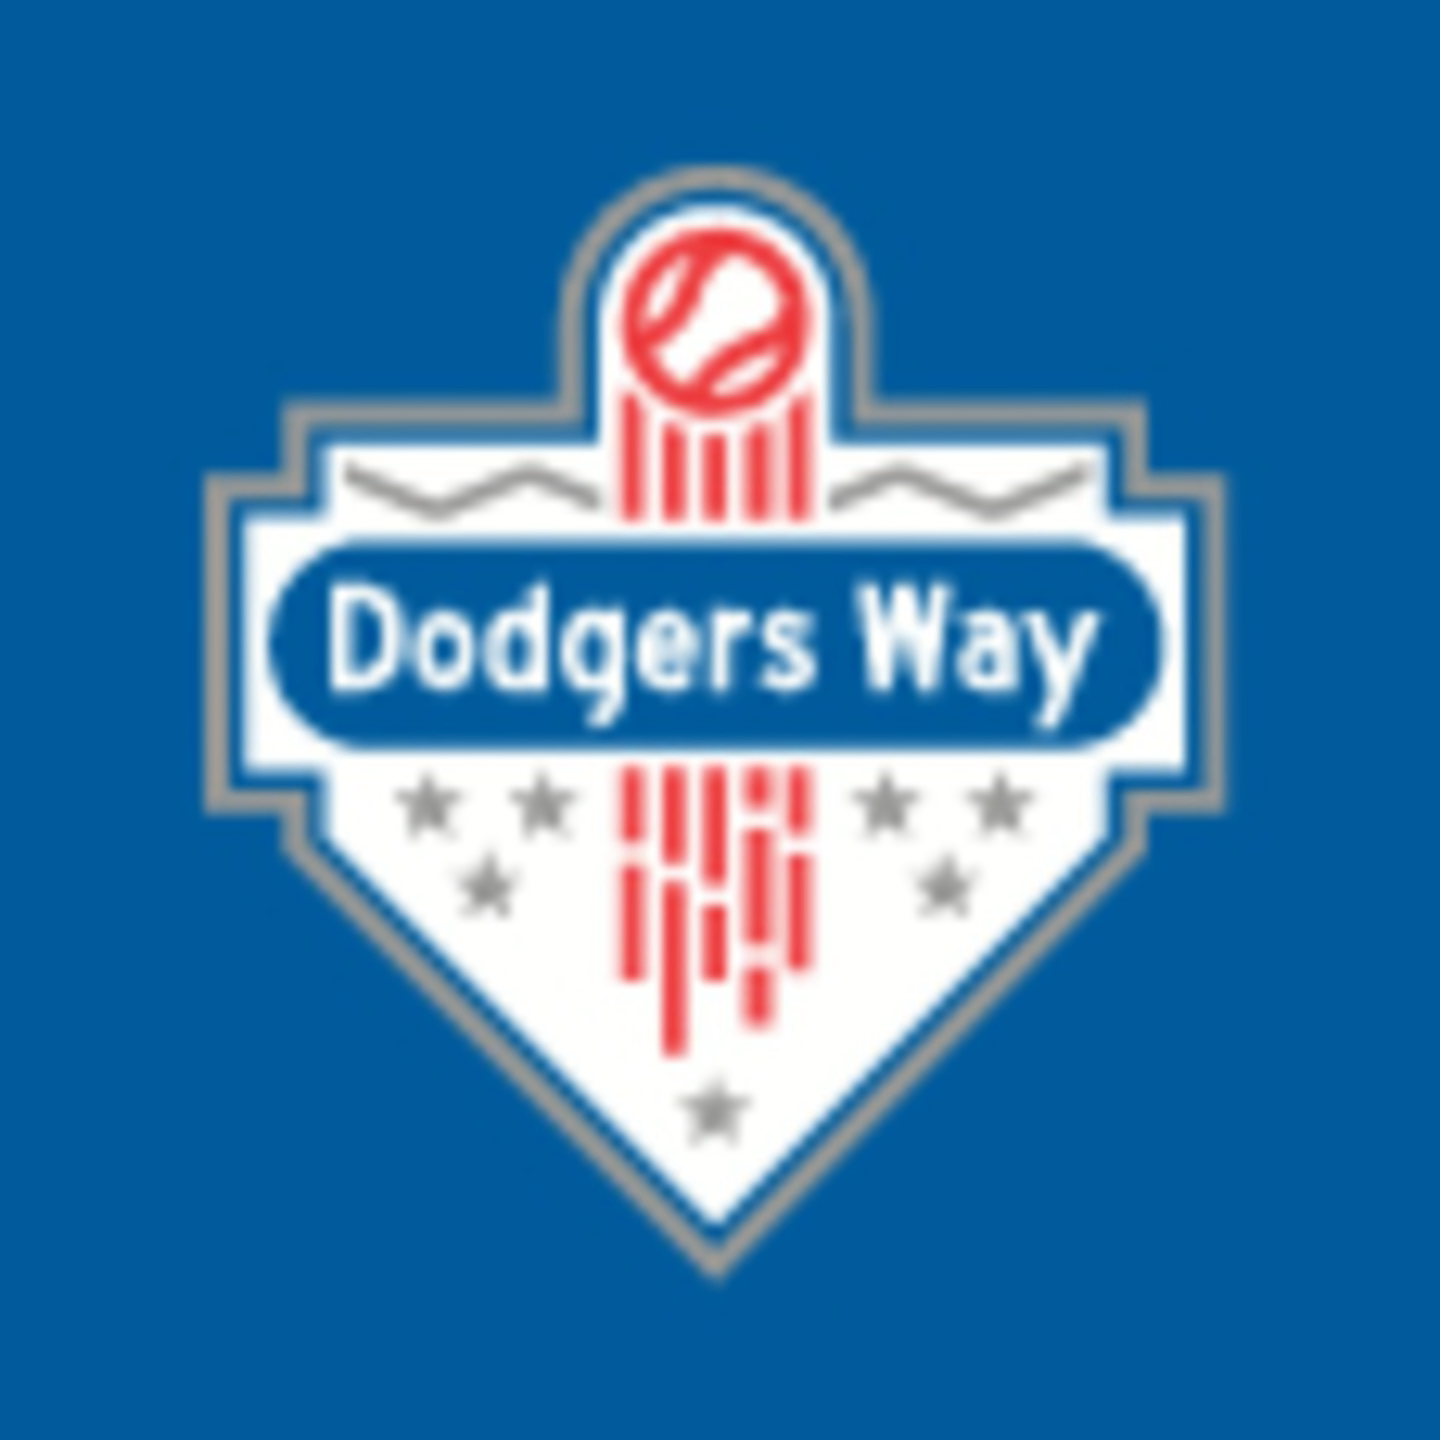 Dodgers Blue Heaven: Welcome to the Blue, Diego Cartaya!